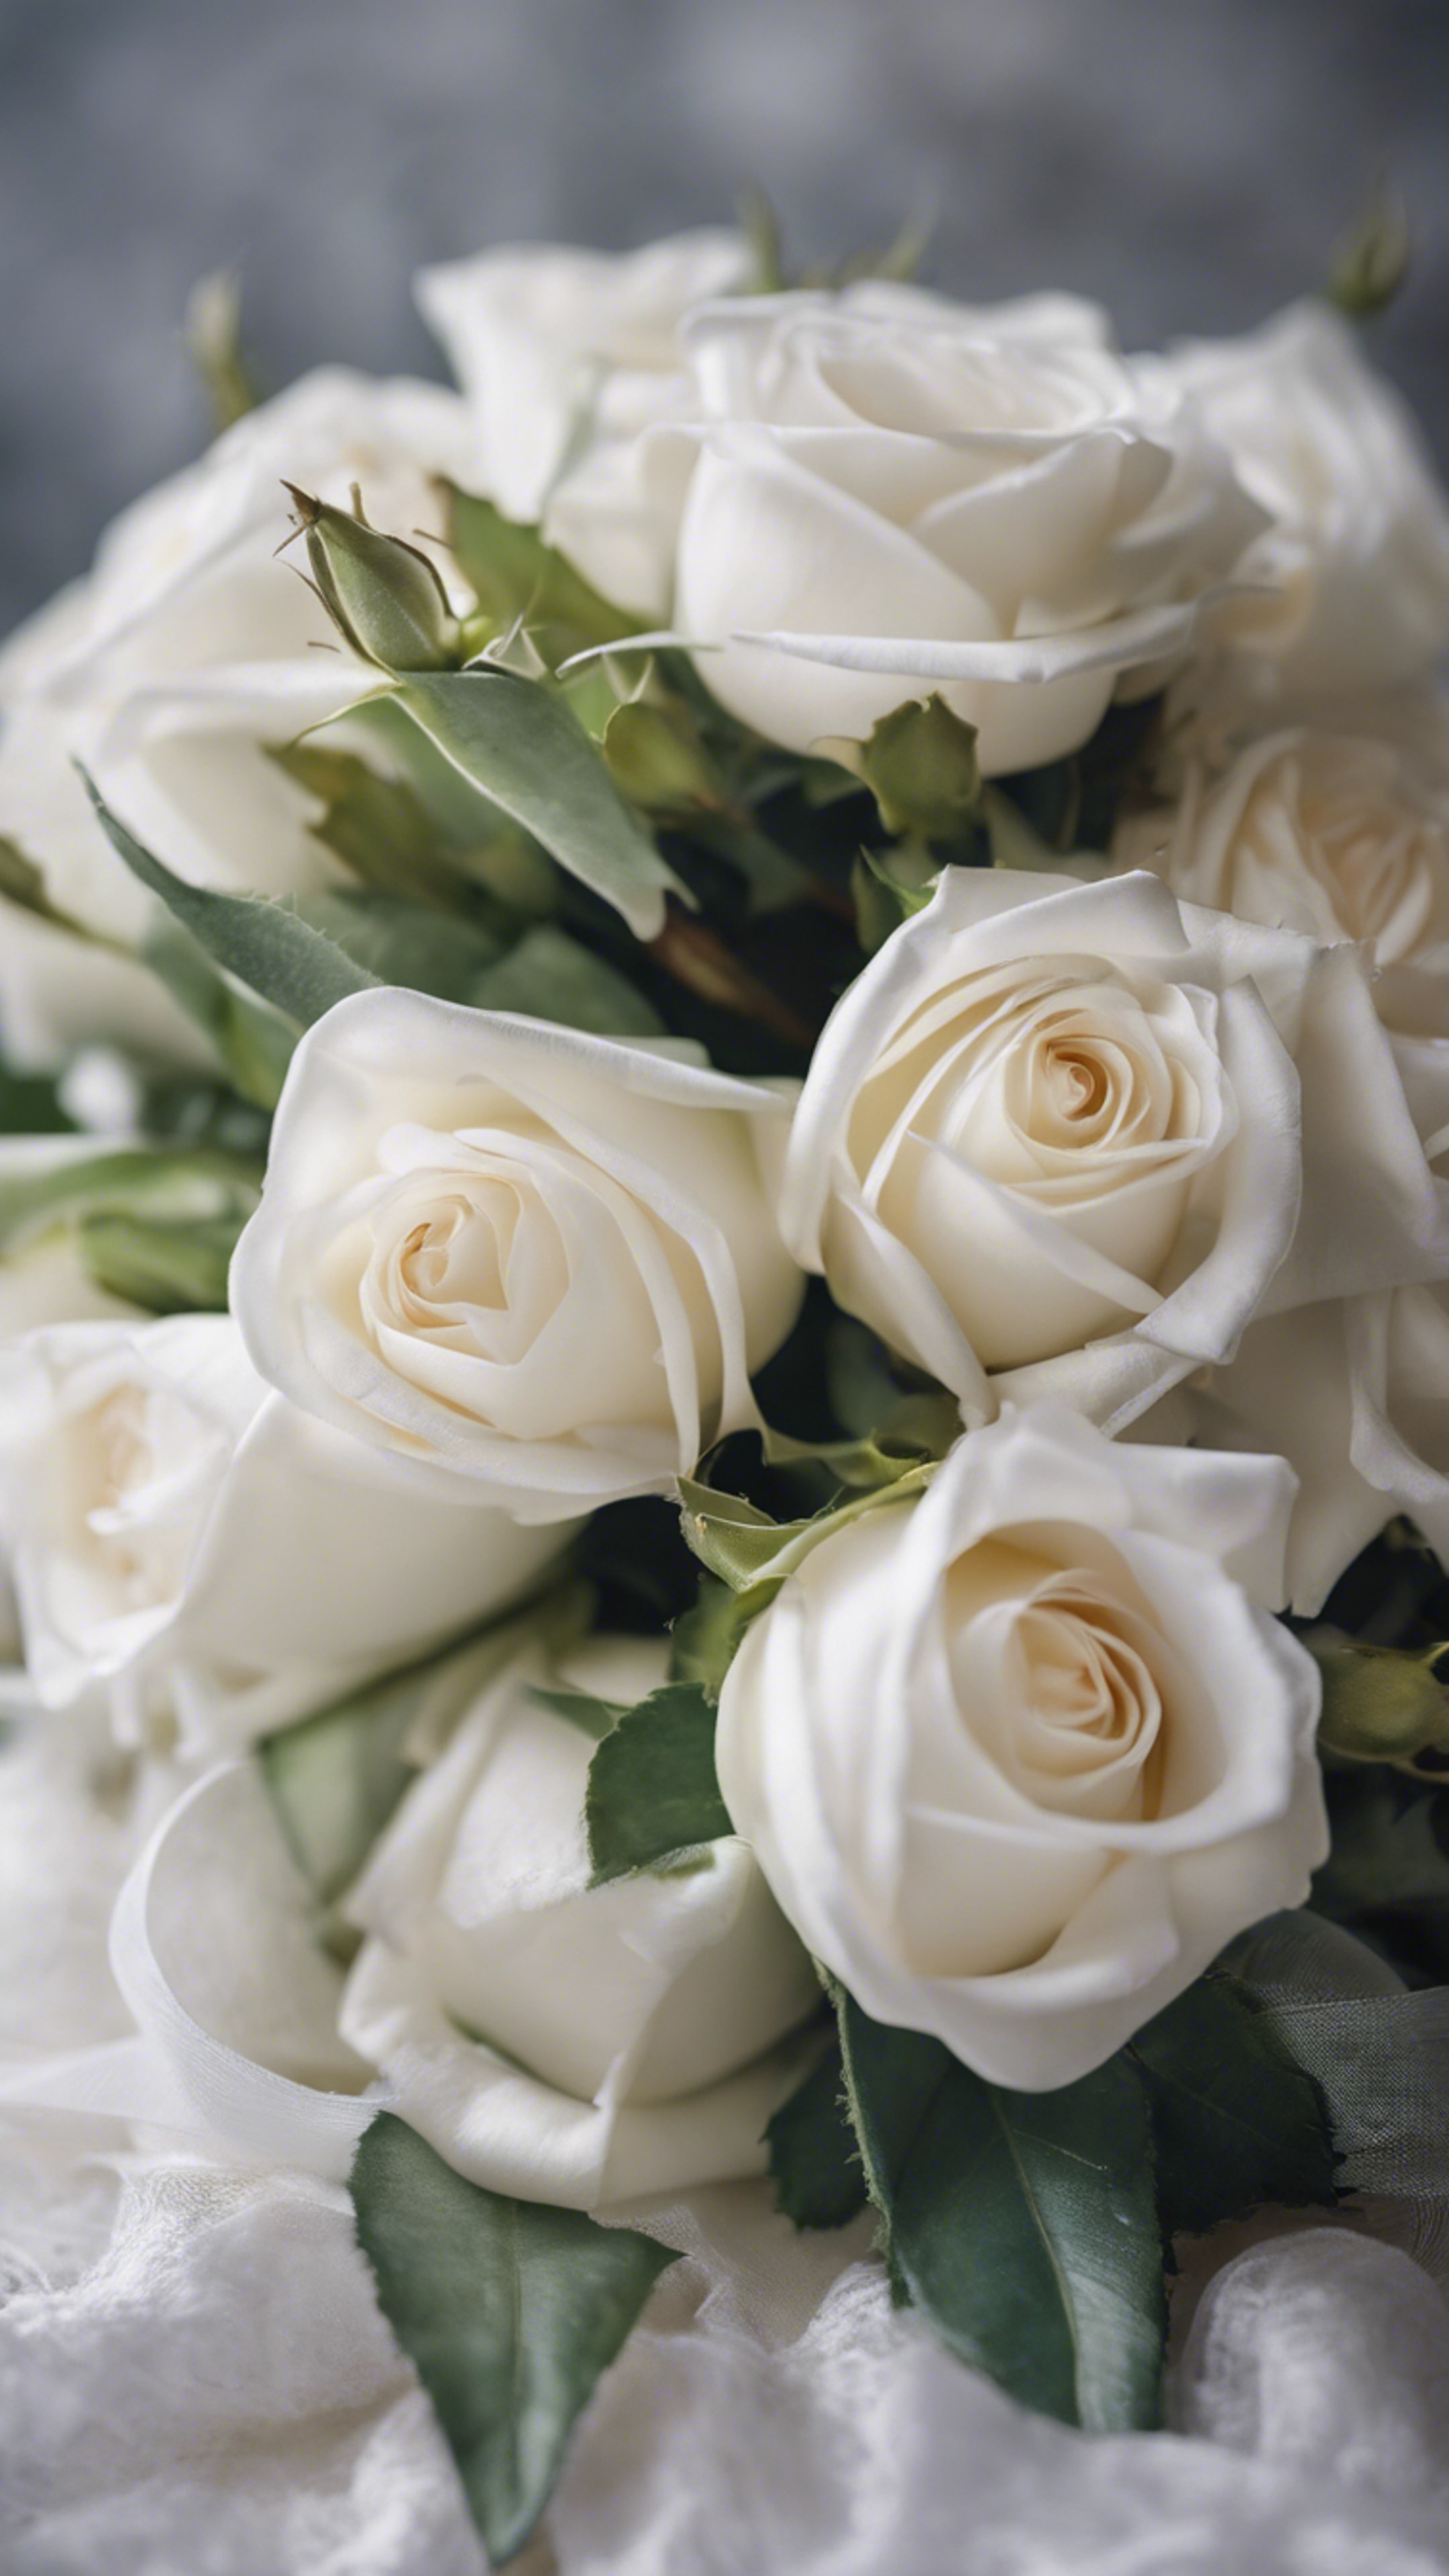 A bouquet of white roses wrapped in sheer white satin ribbon. Tapet[5223d8c249ea42cfaf4b]